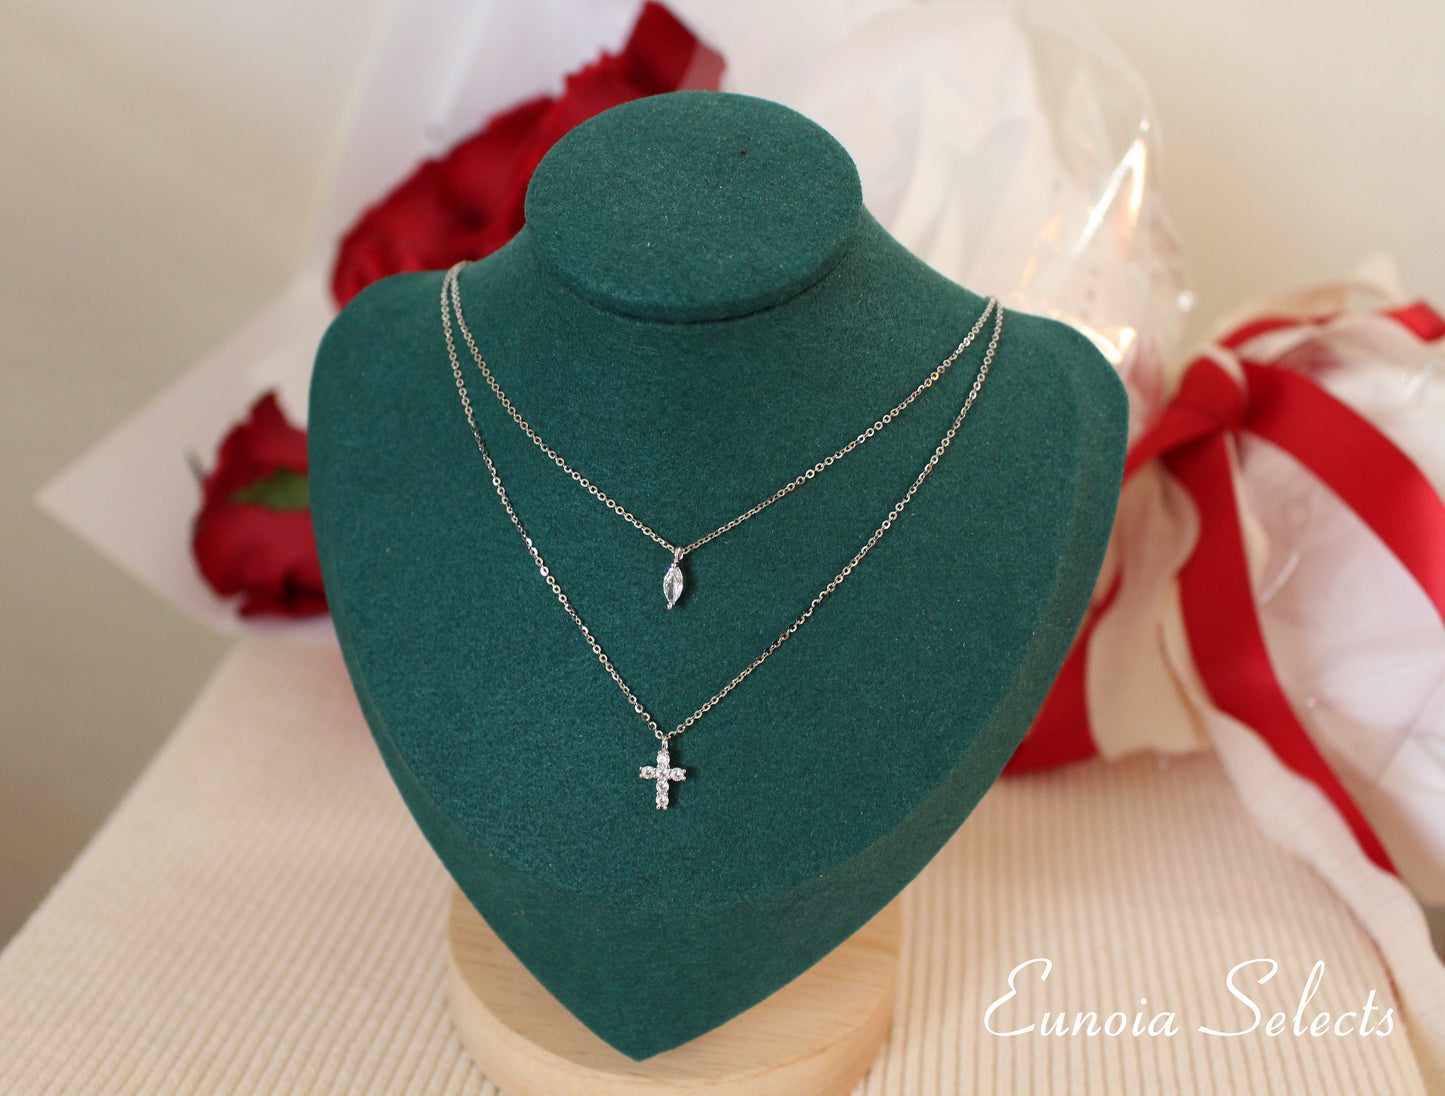 Simple cross charm necklace with S925 silver chain